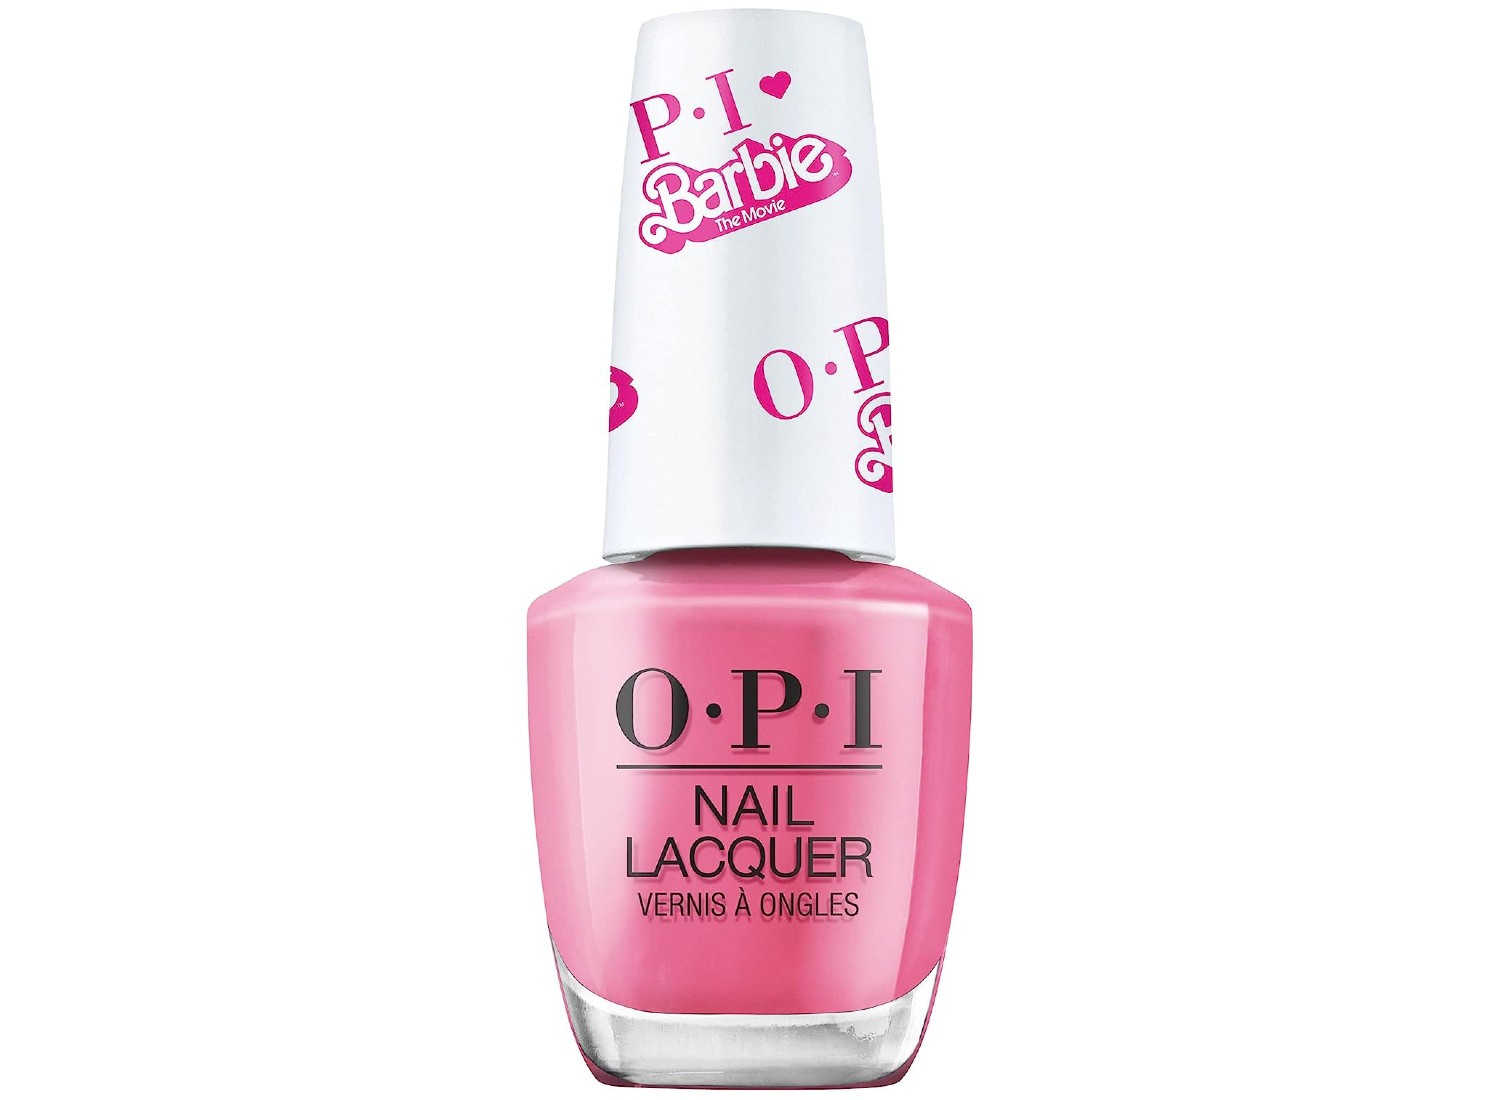 Our Favorite Colors From the OPI x Barbie Nail Polish Collection